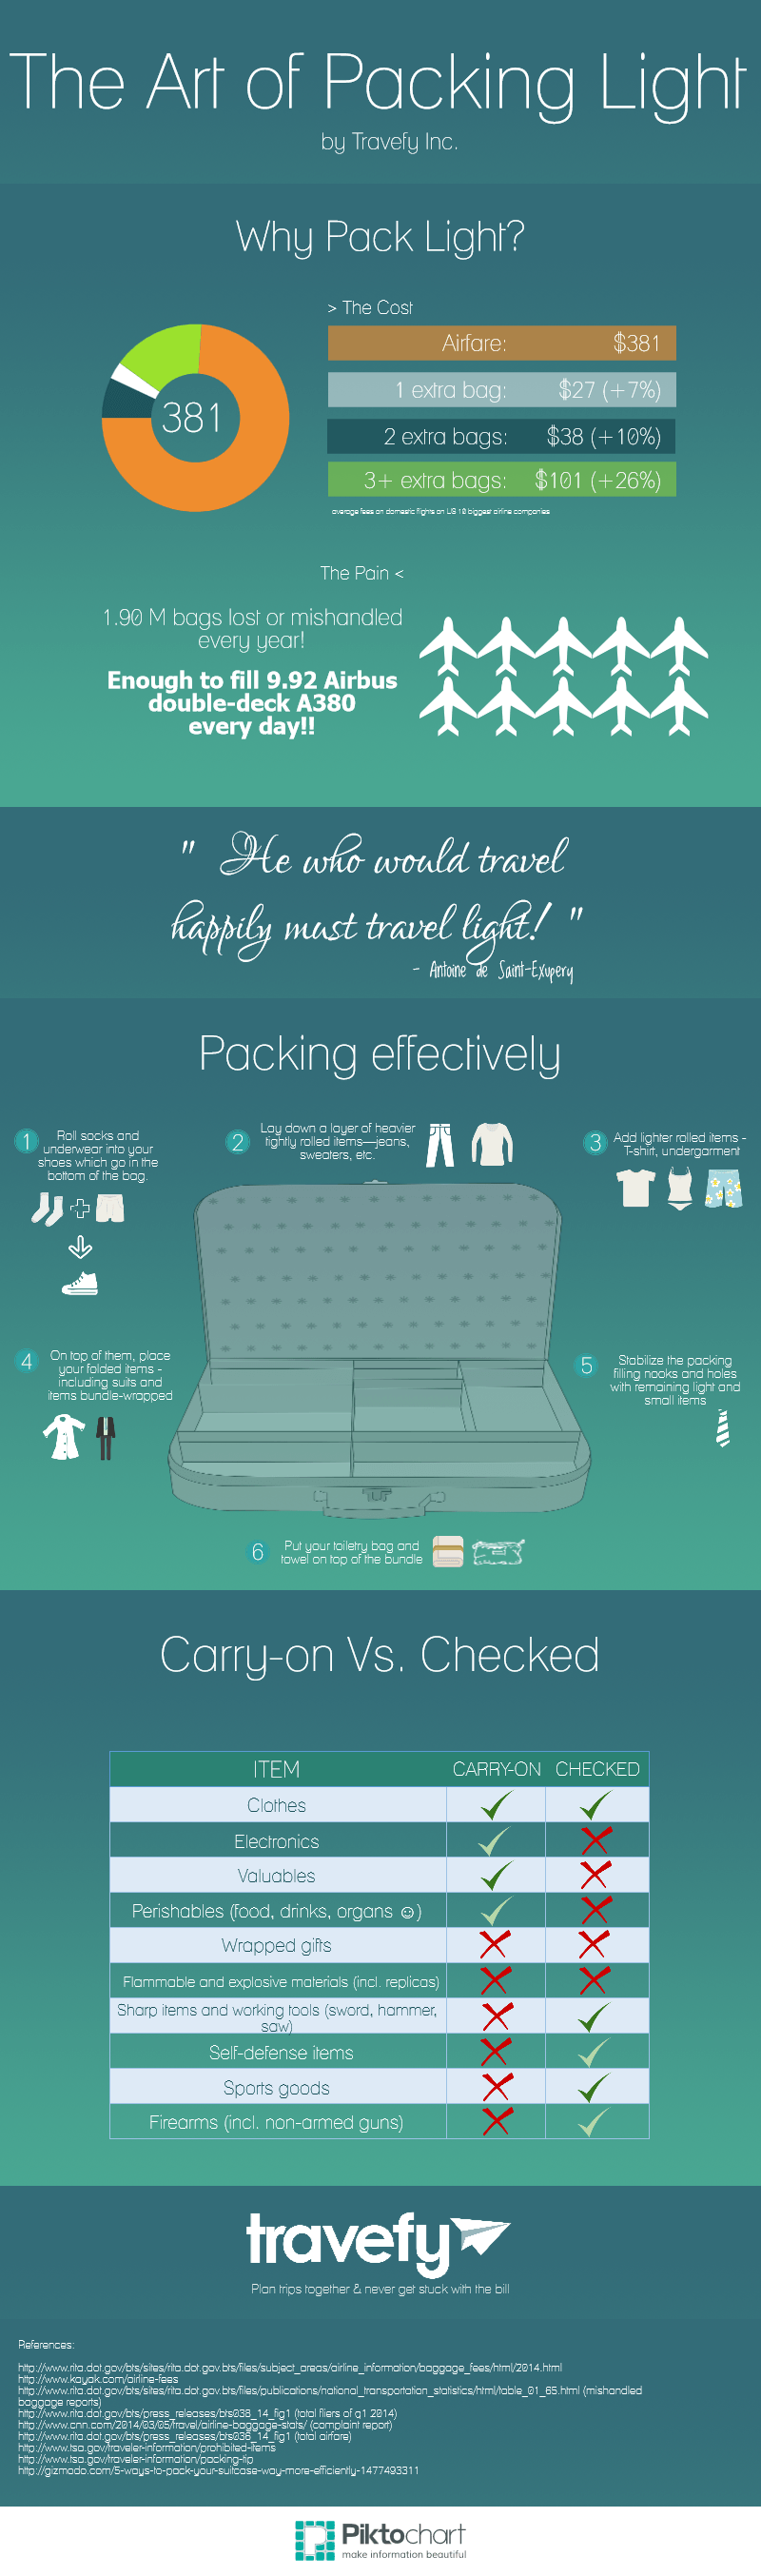 Guide To The Art of Packing Light